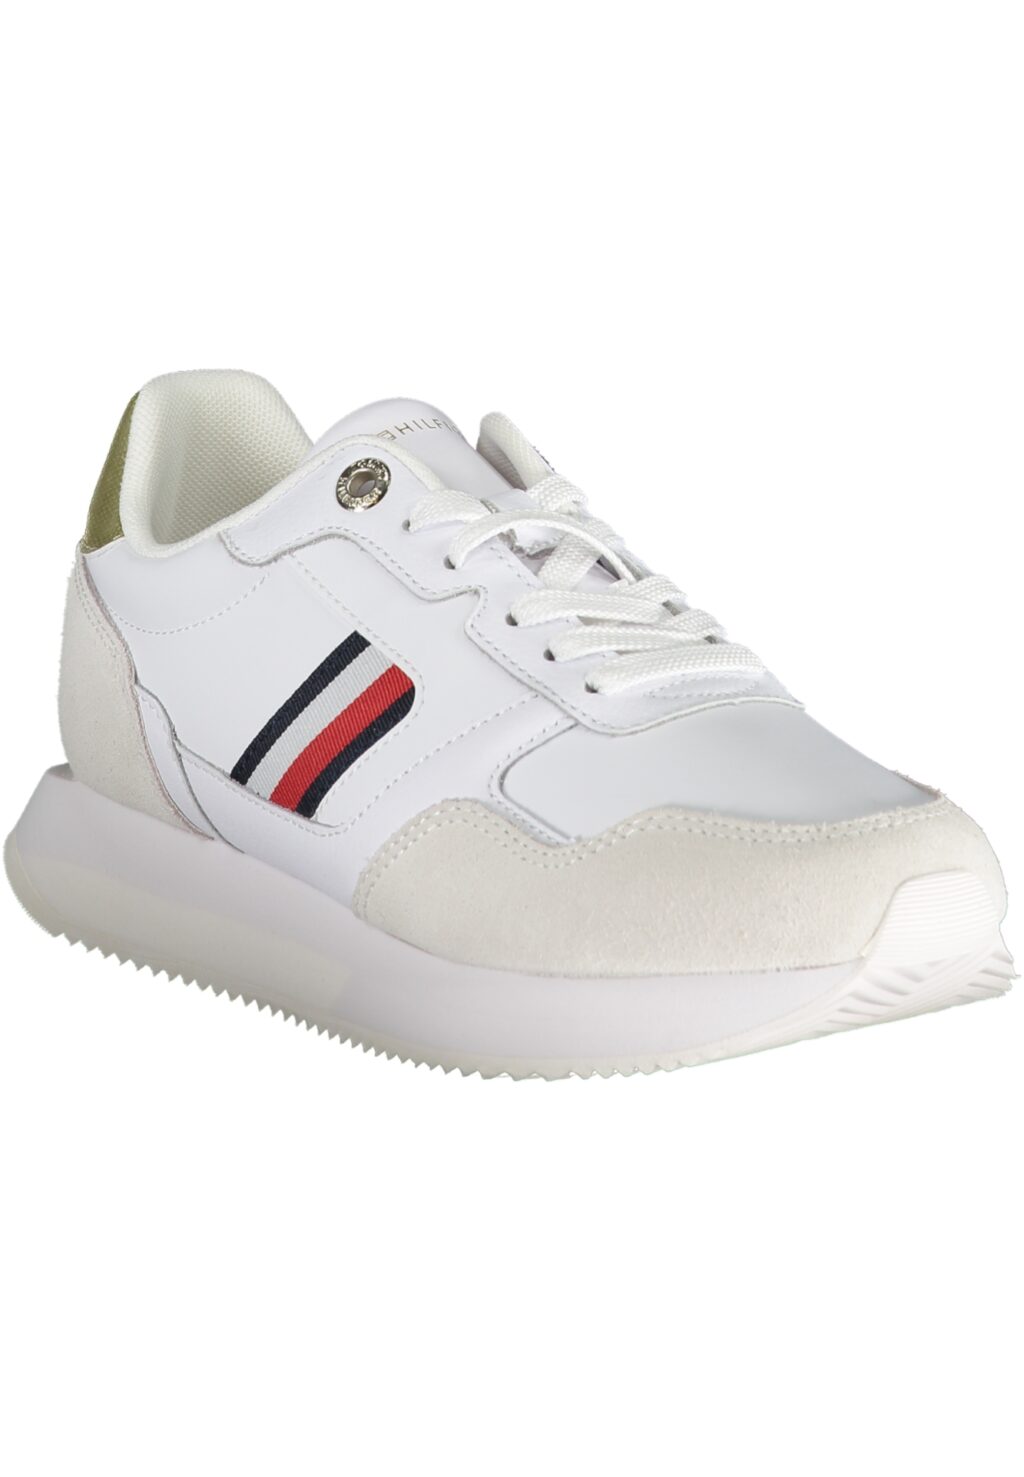 TOMMY HILFIGER WHITE WOMEN'S SPORTS SHOES FW0FW07584F_BIYBS